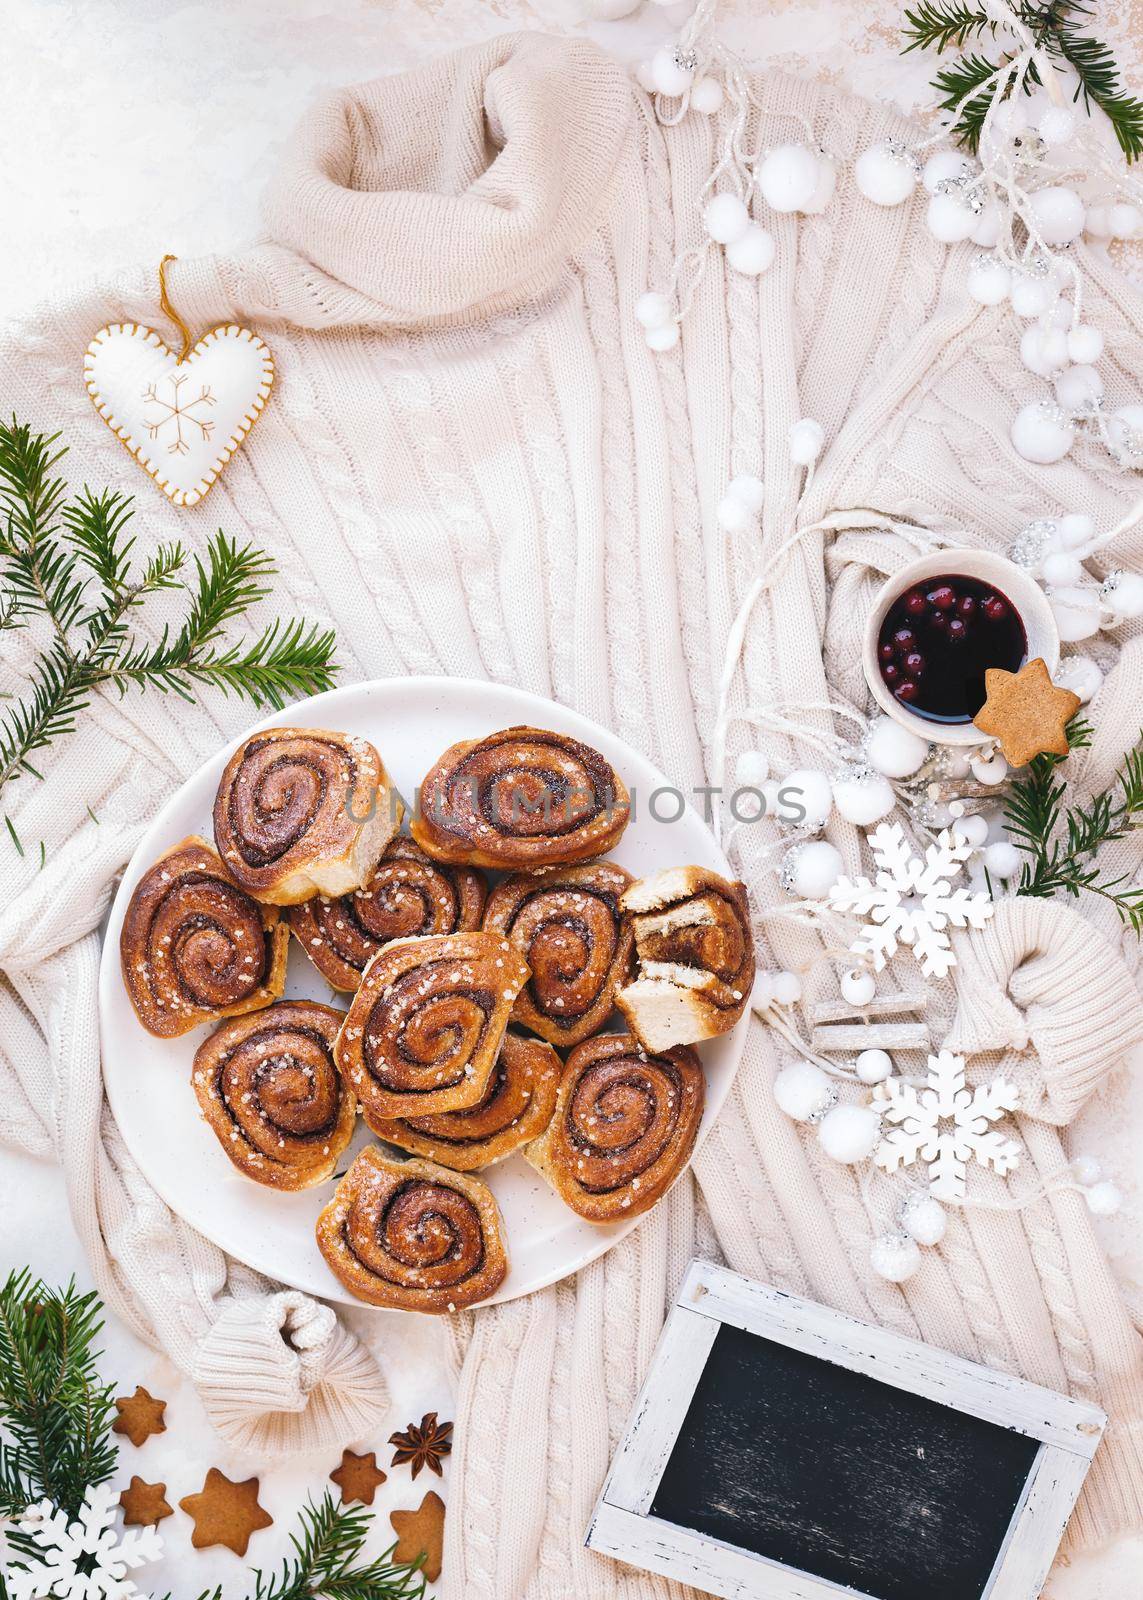 Cozy festive, Christmas, lifestyle concept. Freshly baked cinnamon rolls , knitted woolen light beige sweater and Christmas decorations . Top view,  copy space